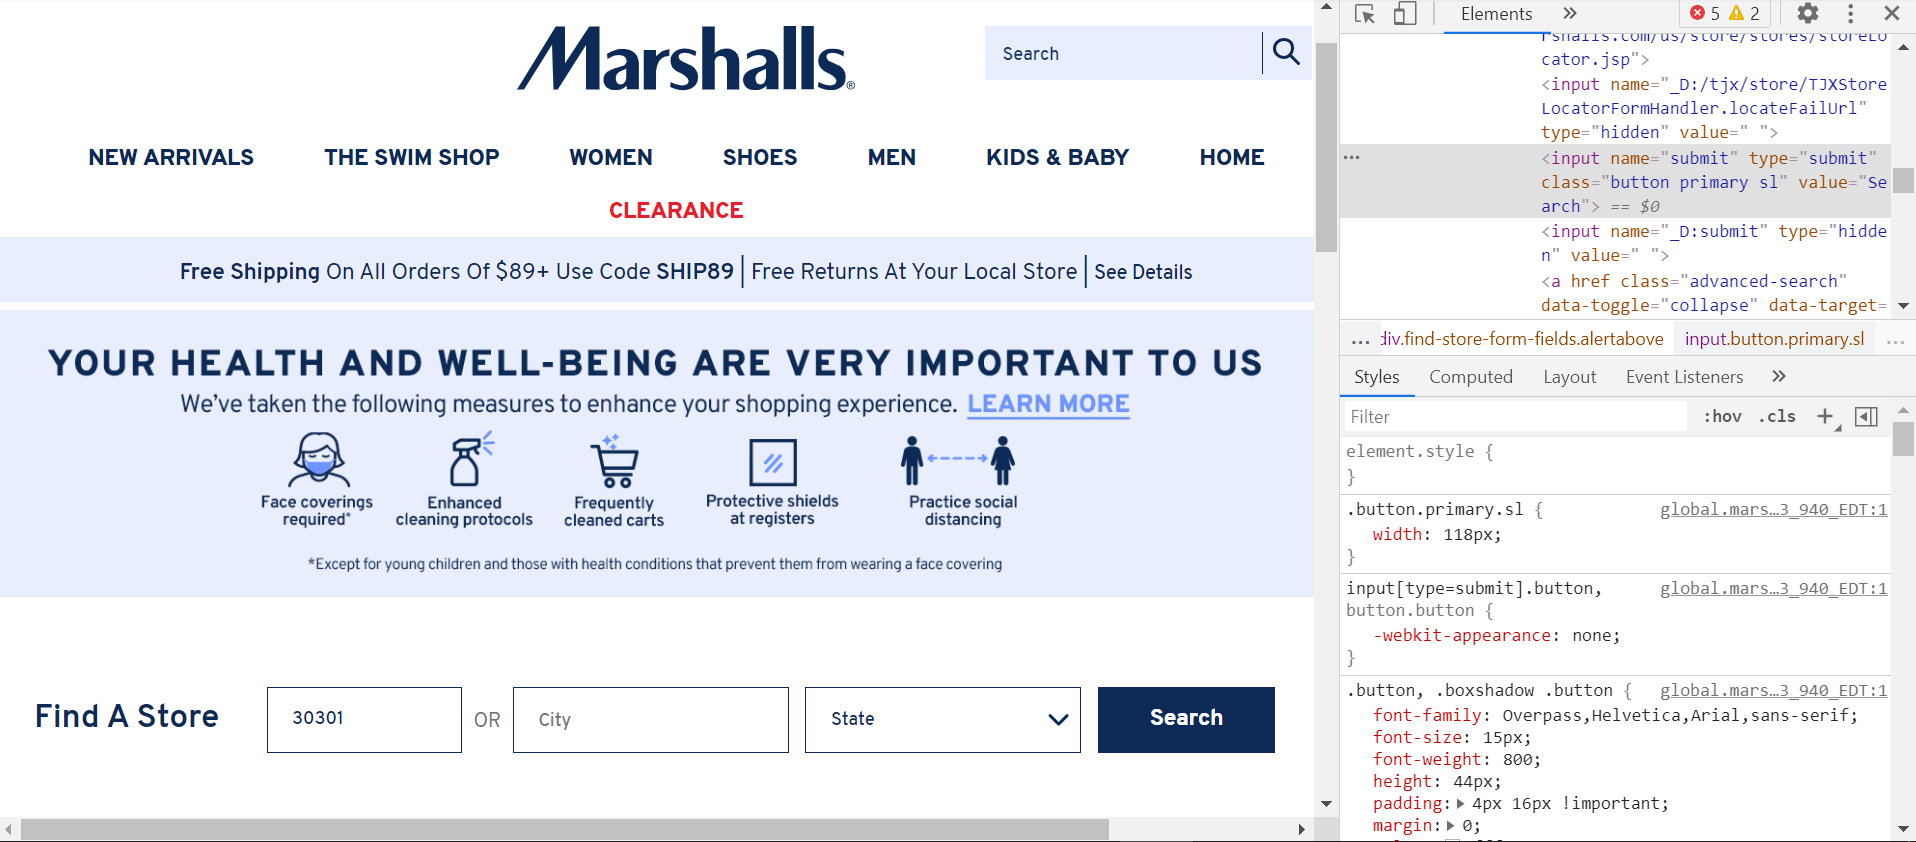 HTML source code for Marshalls store locator webpage